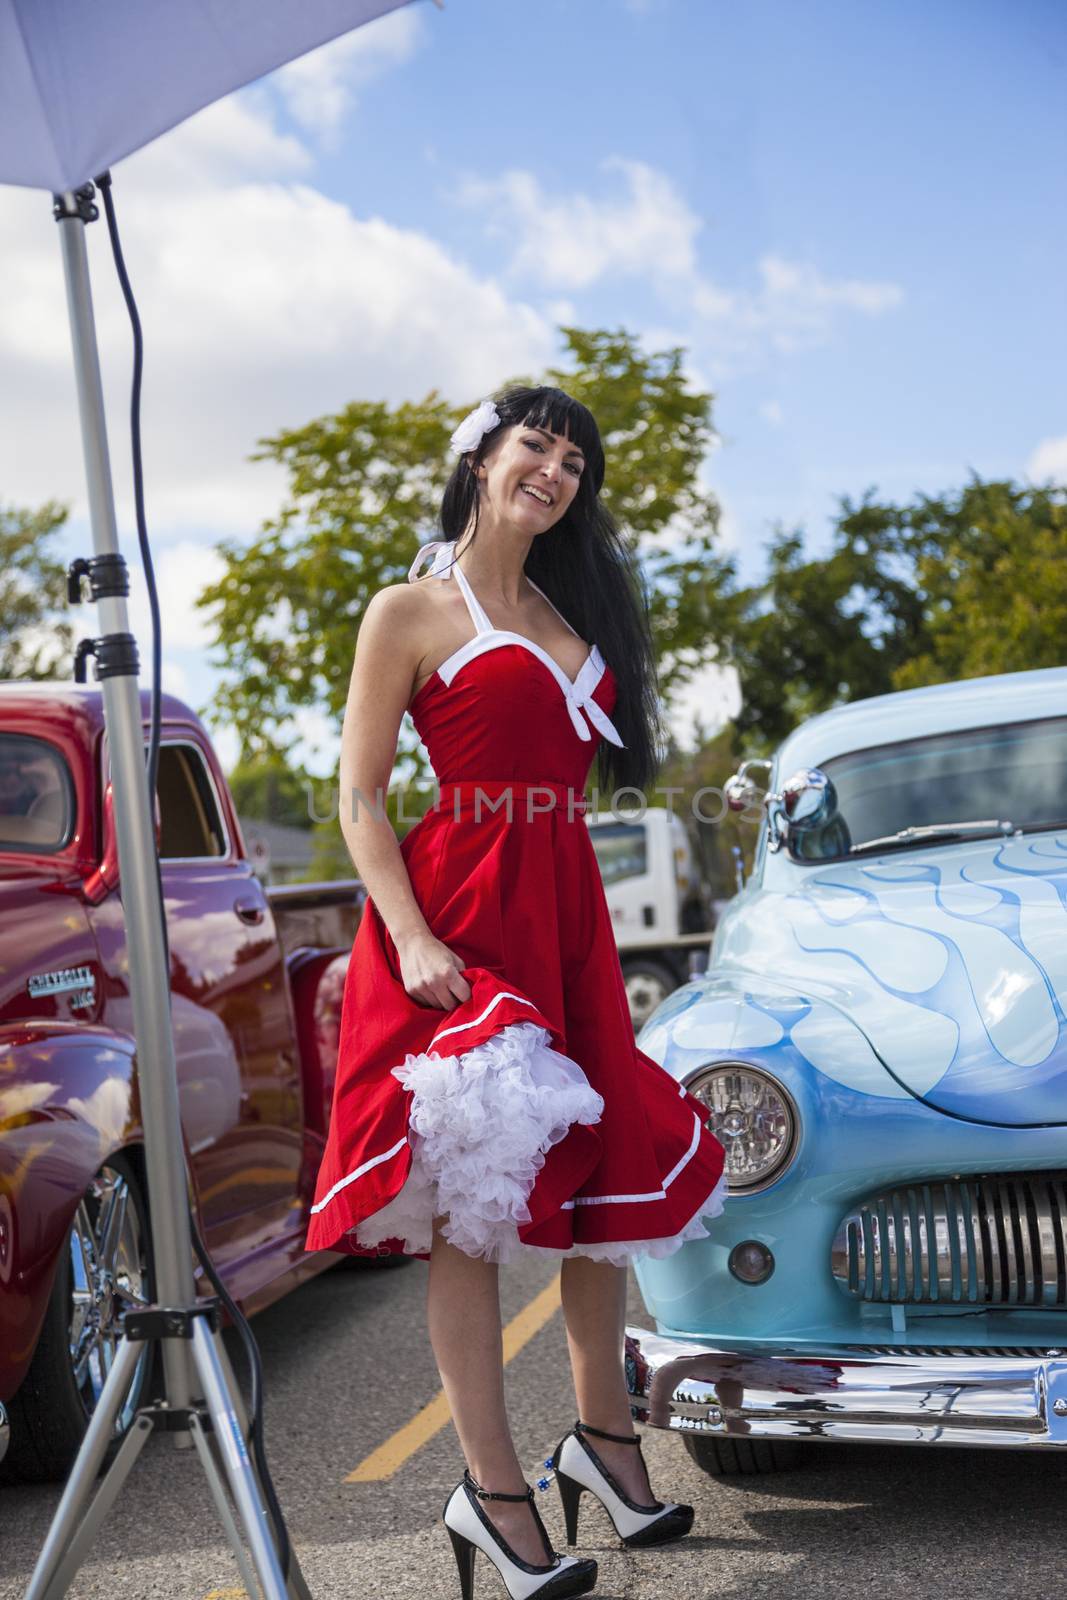 Pin Up Girls with Great Cars by Imagecom